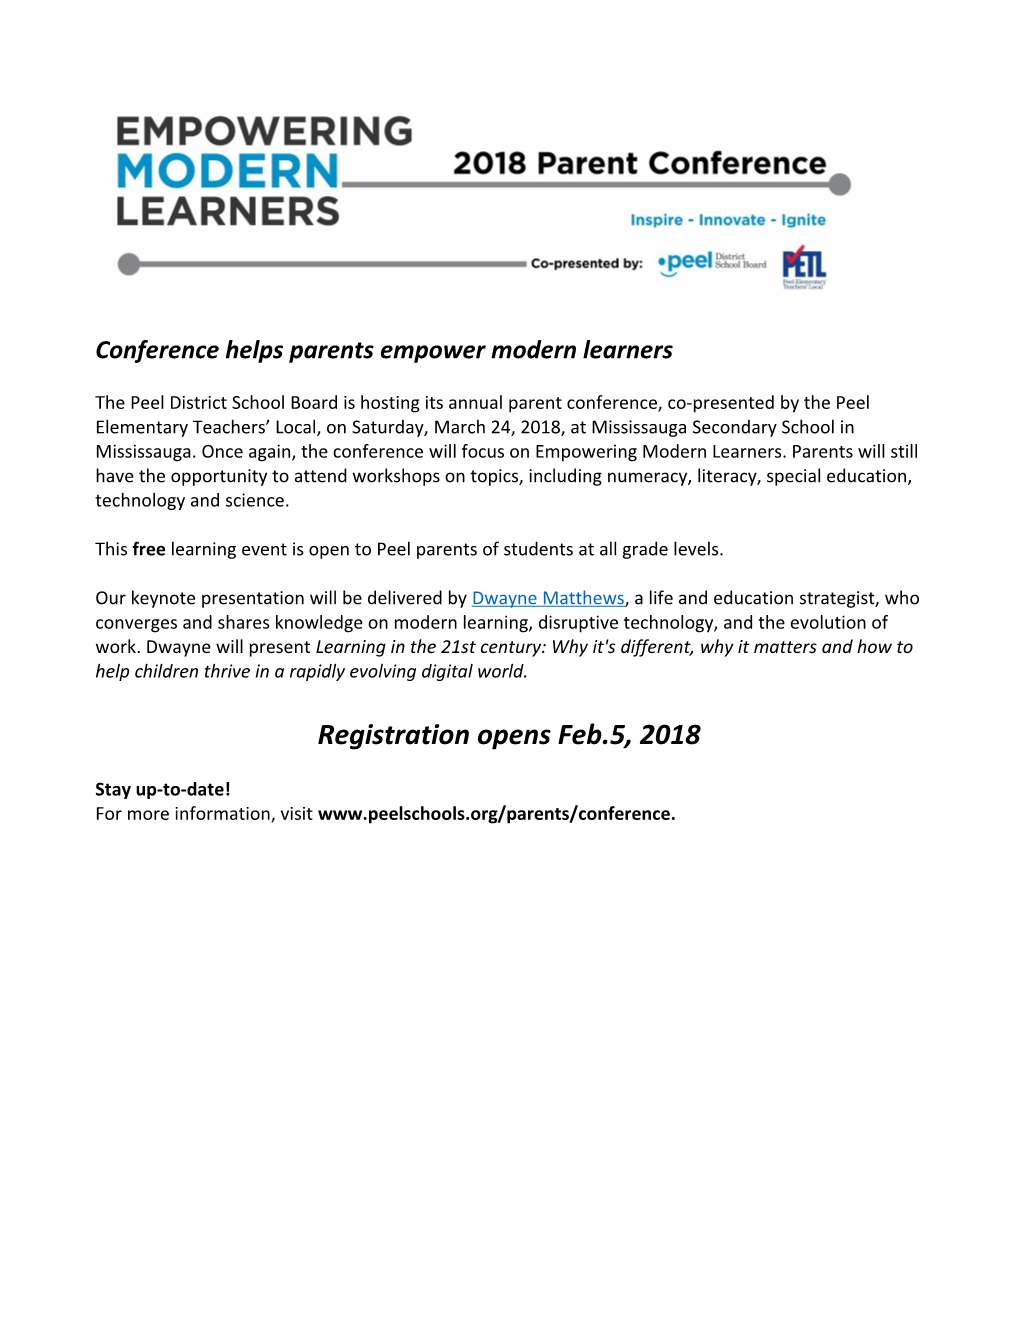 Conference Helps Parents Empower Modern Learners